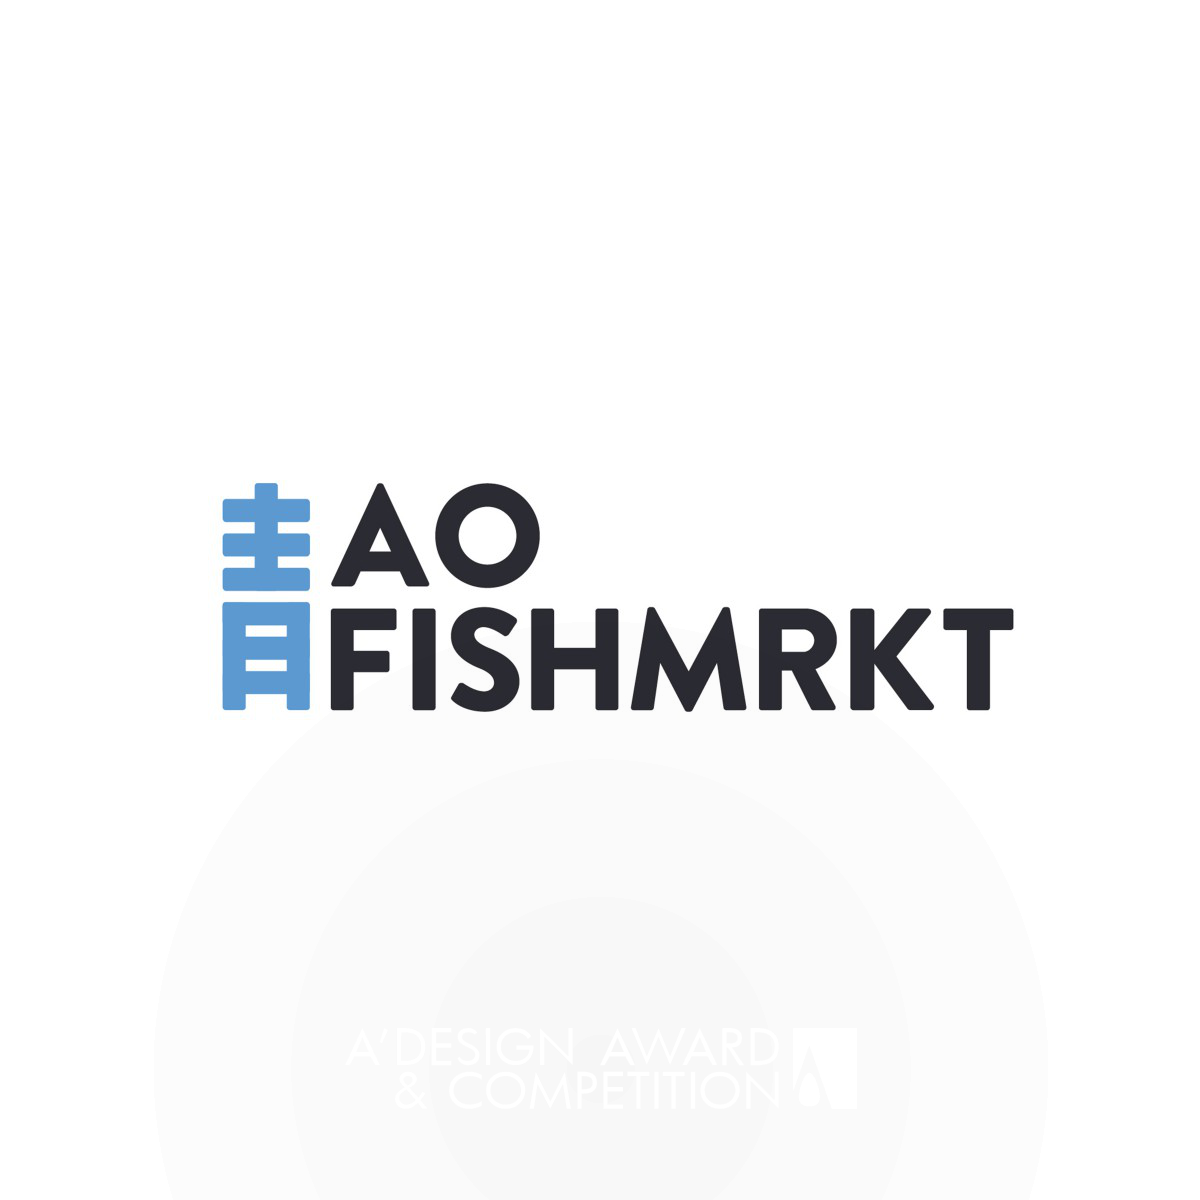 AO FISH MARKET Corporate Identity by JungWon Audrey Choe